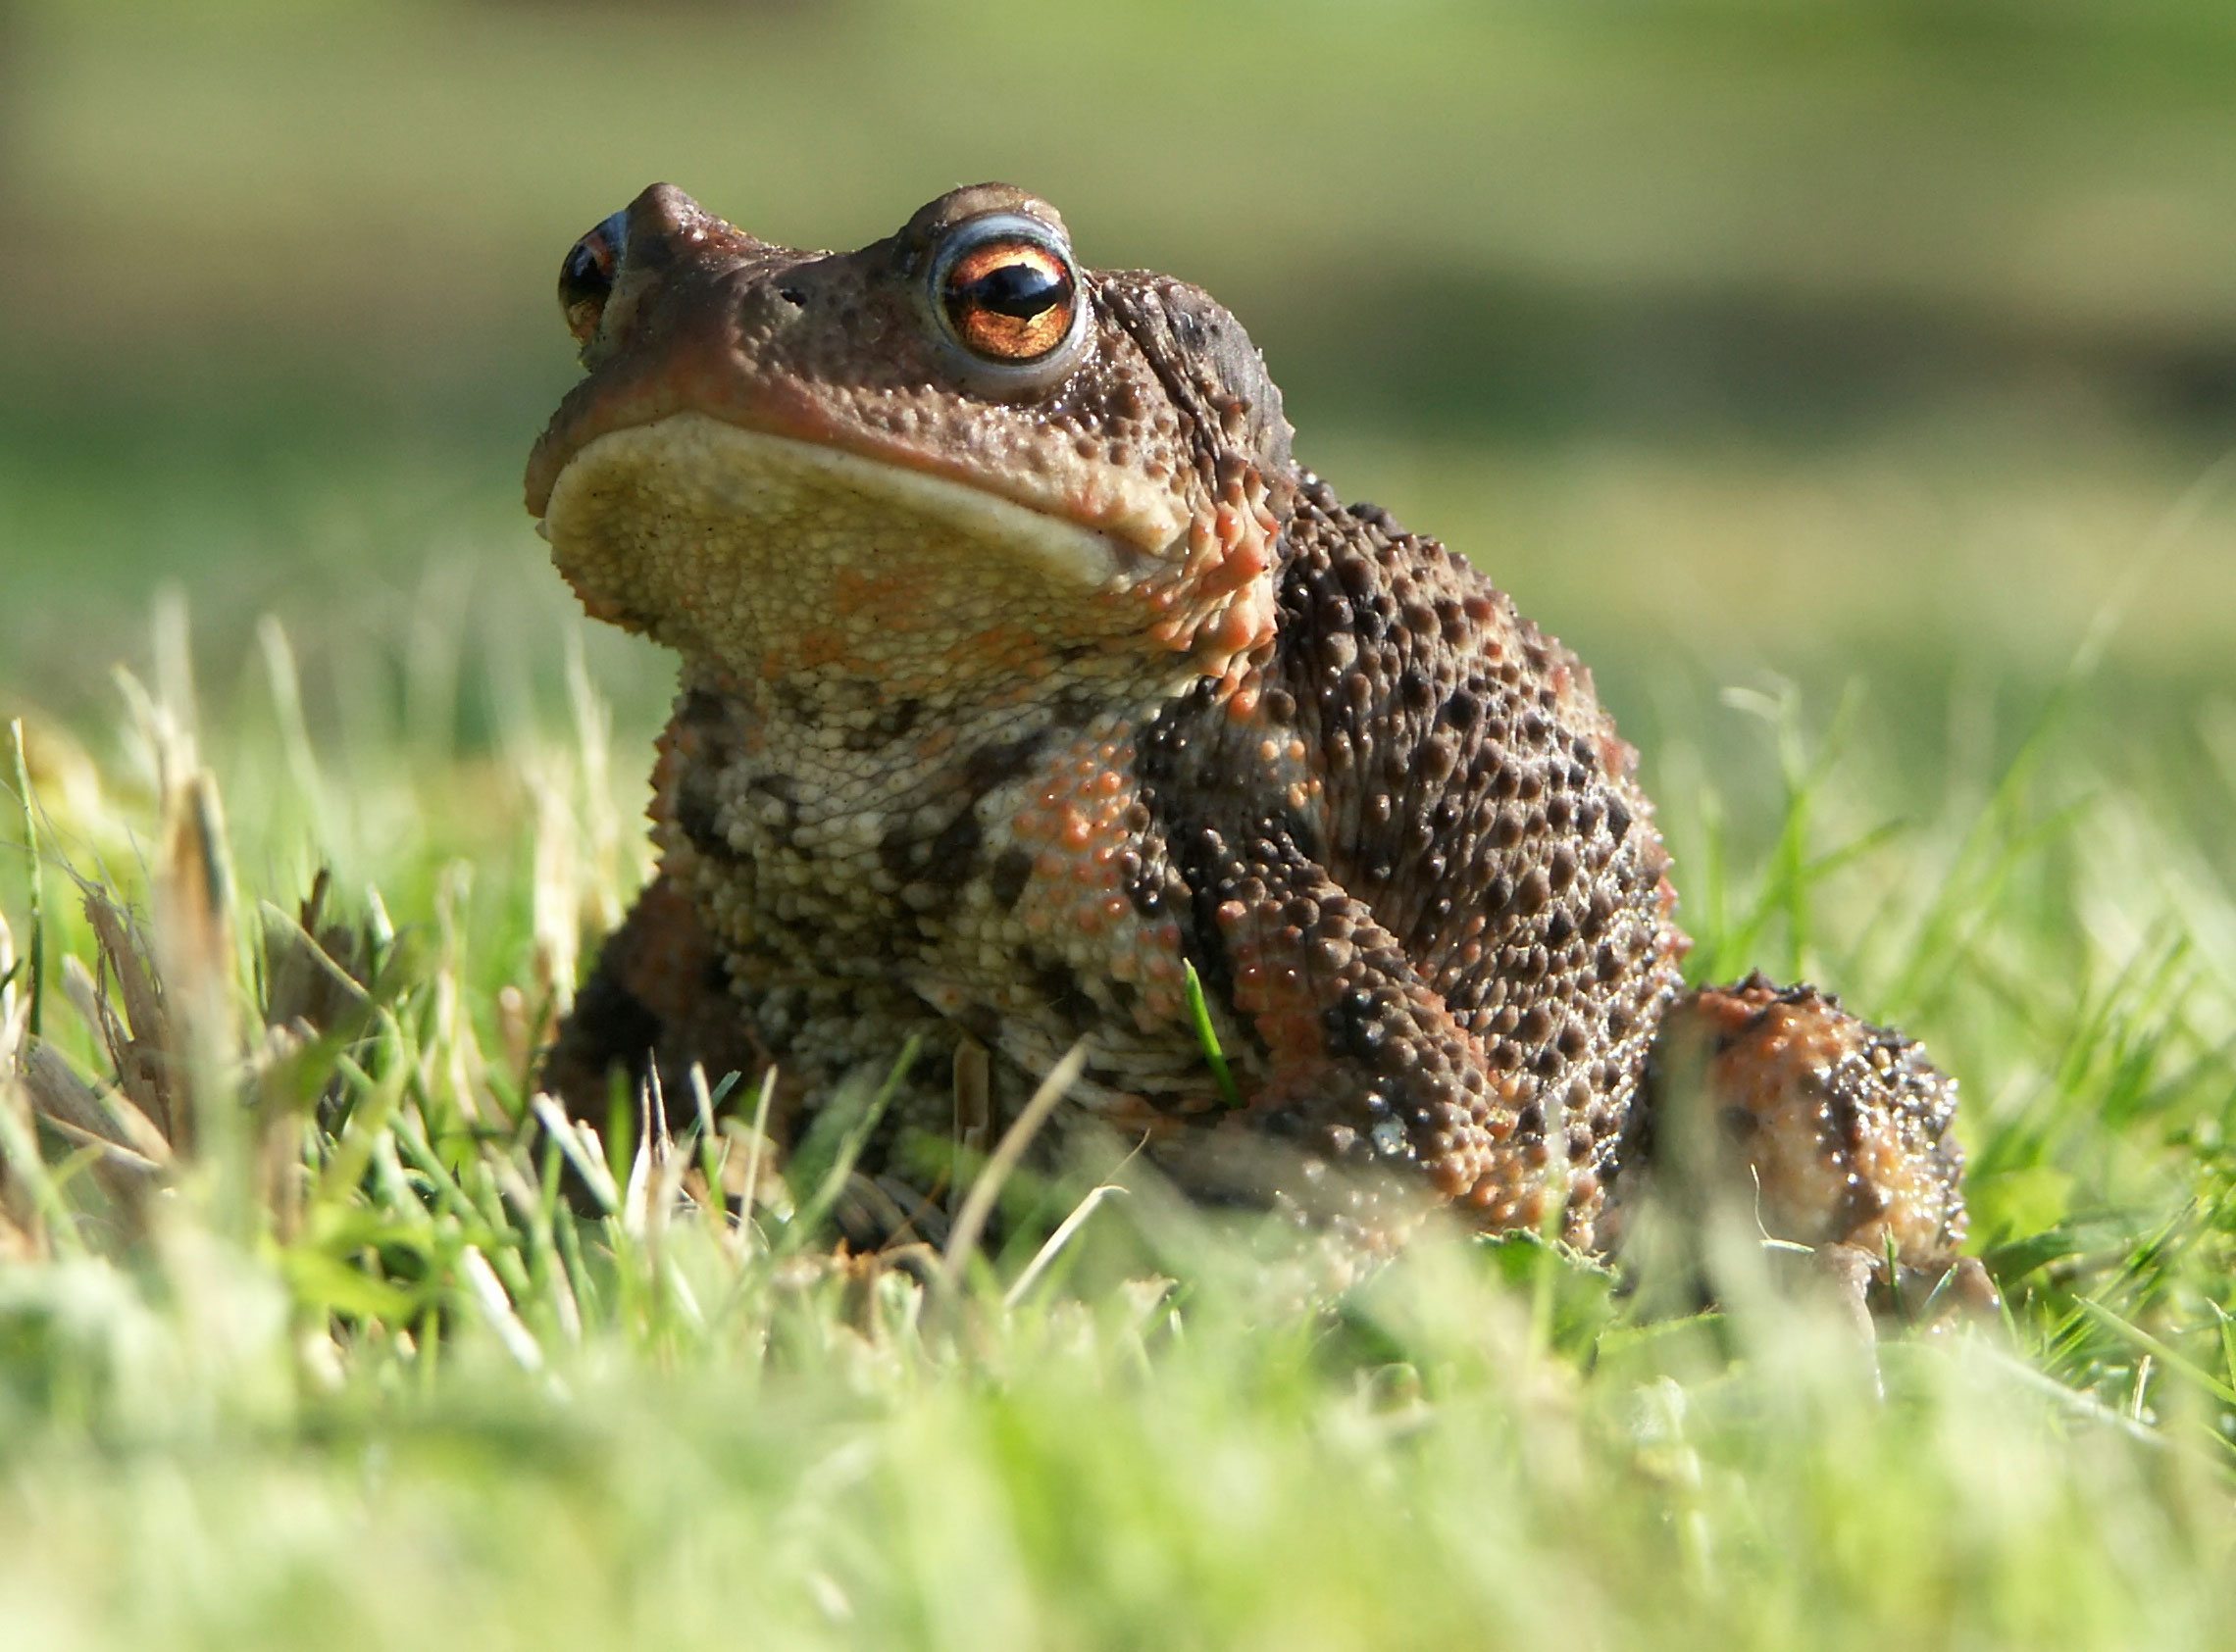 DIY Toad Houses: What To Use As A Toad House